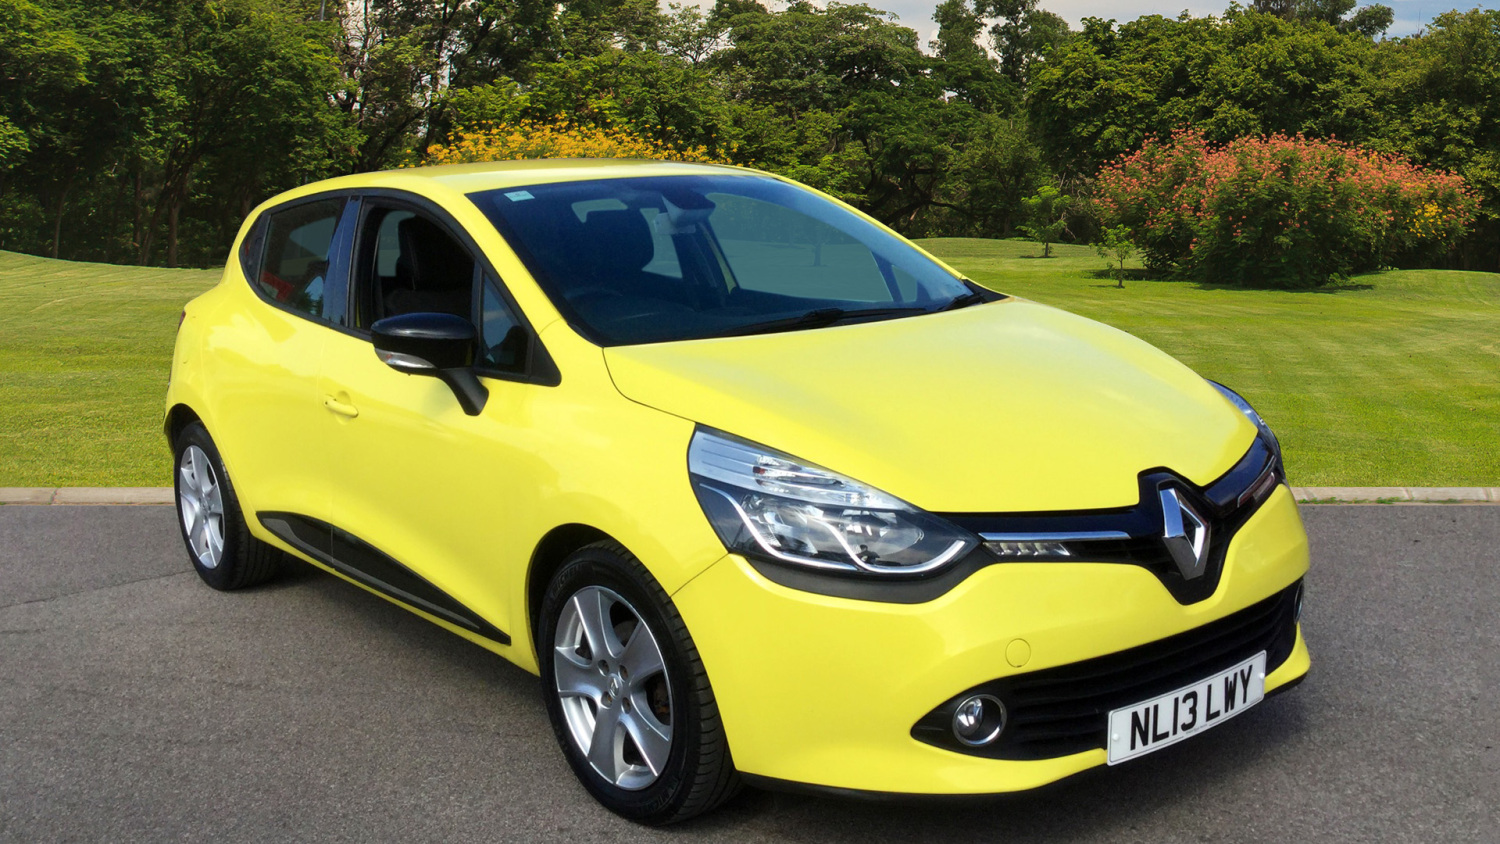 Used Renault Clio 1.5 Dci 90 Dynamique Medianav Energy 5Dr